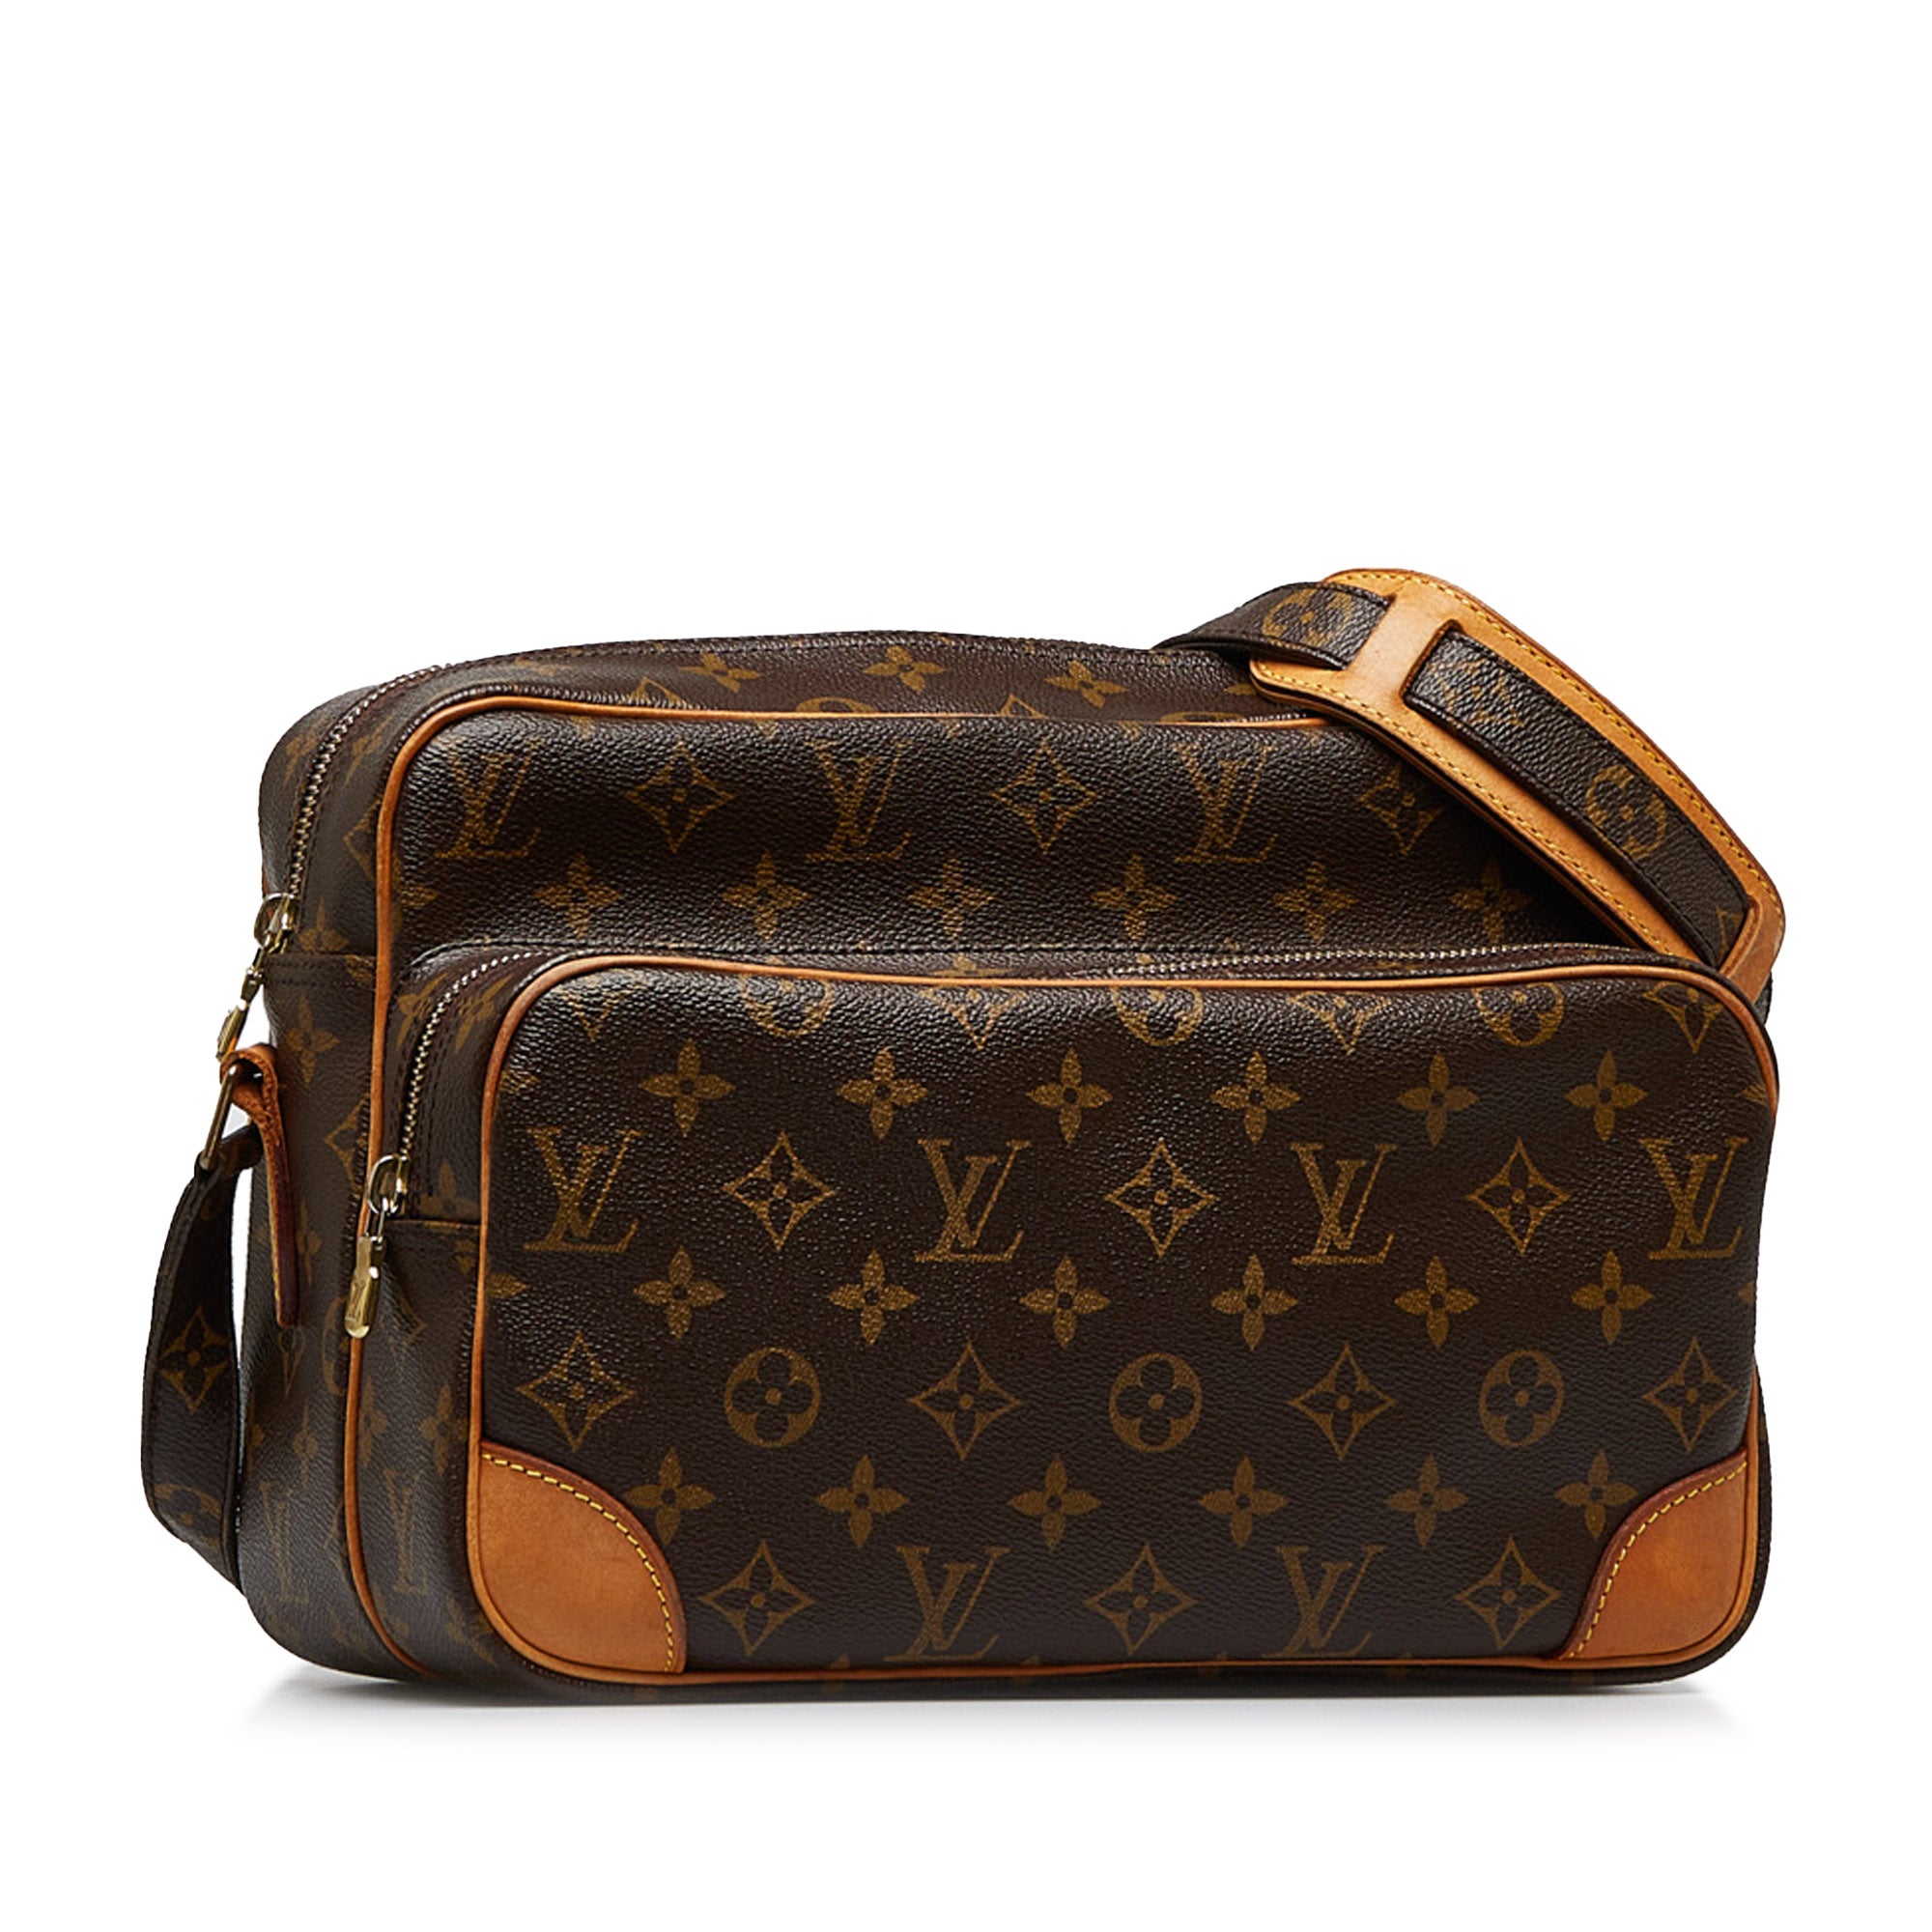 Buy Louis Vuitton Nile Bag in Monogram Canvas and Brown Leather